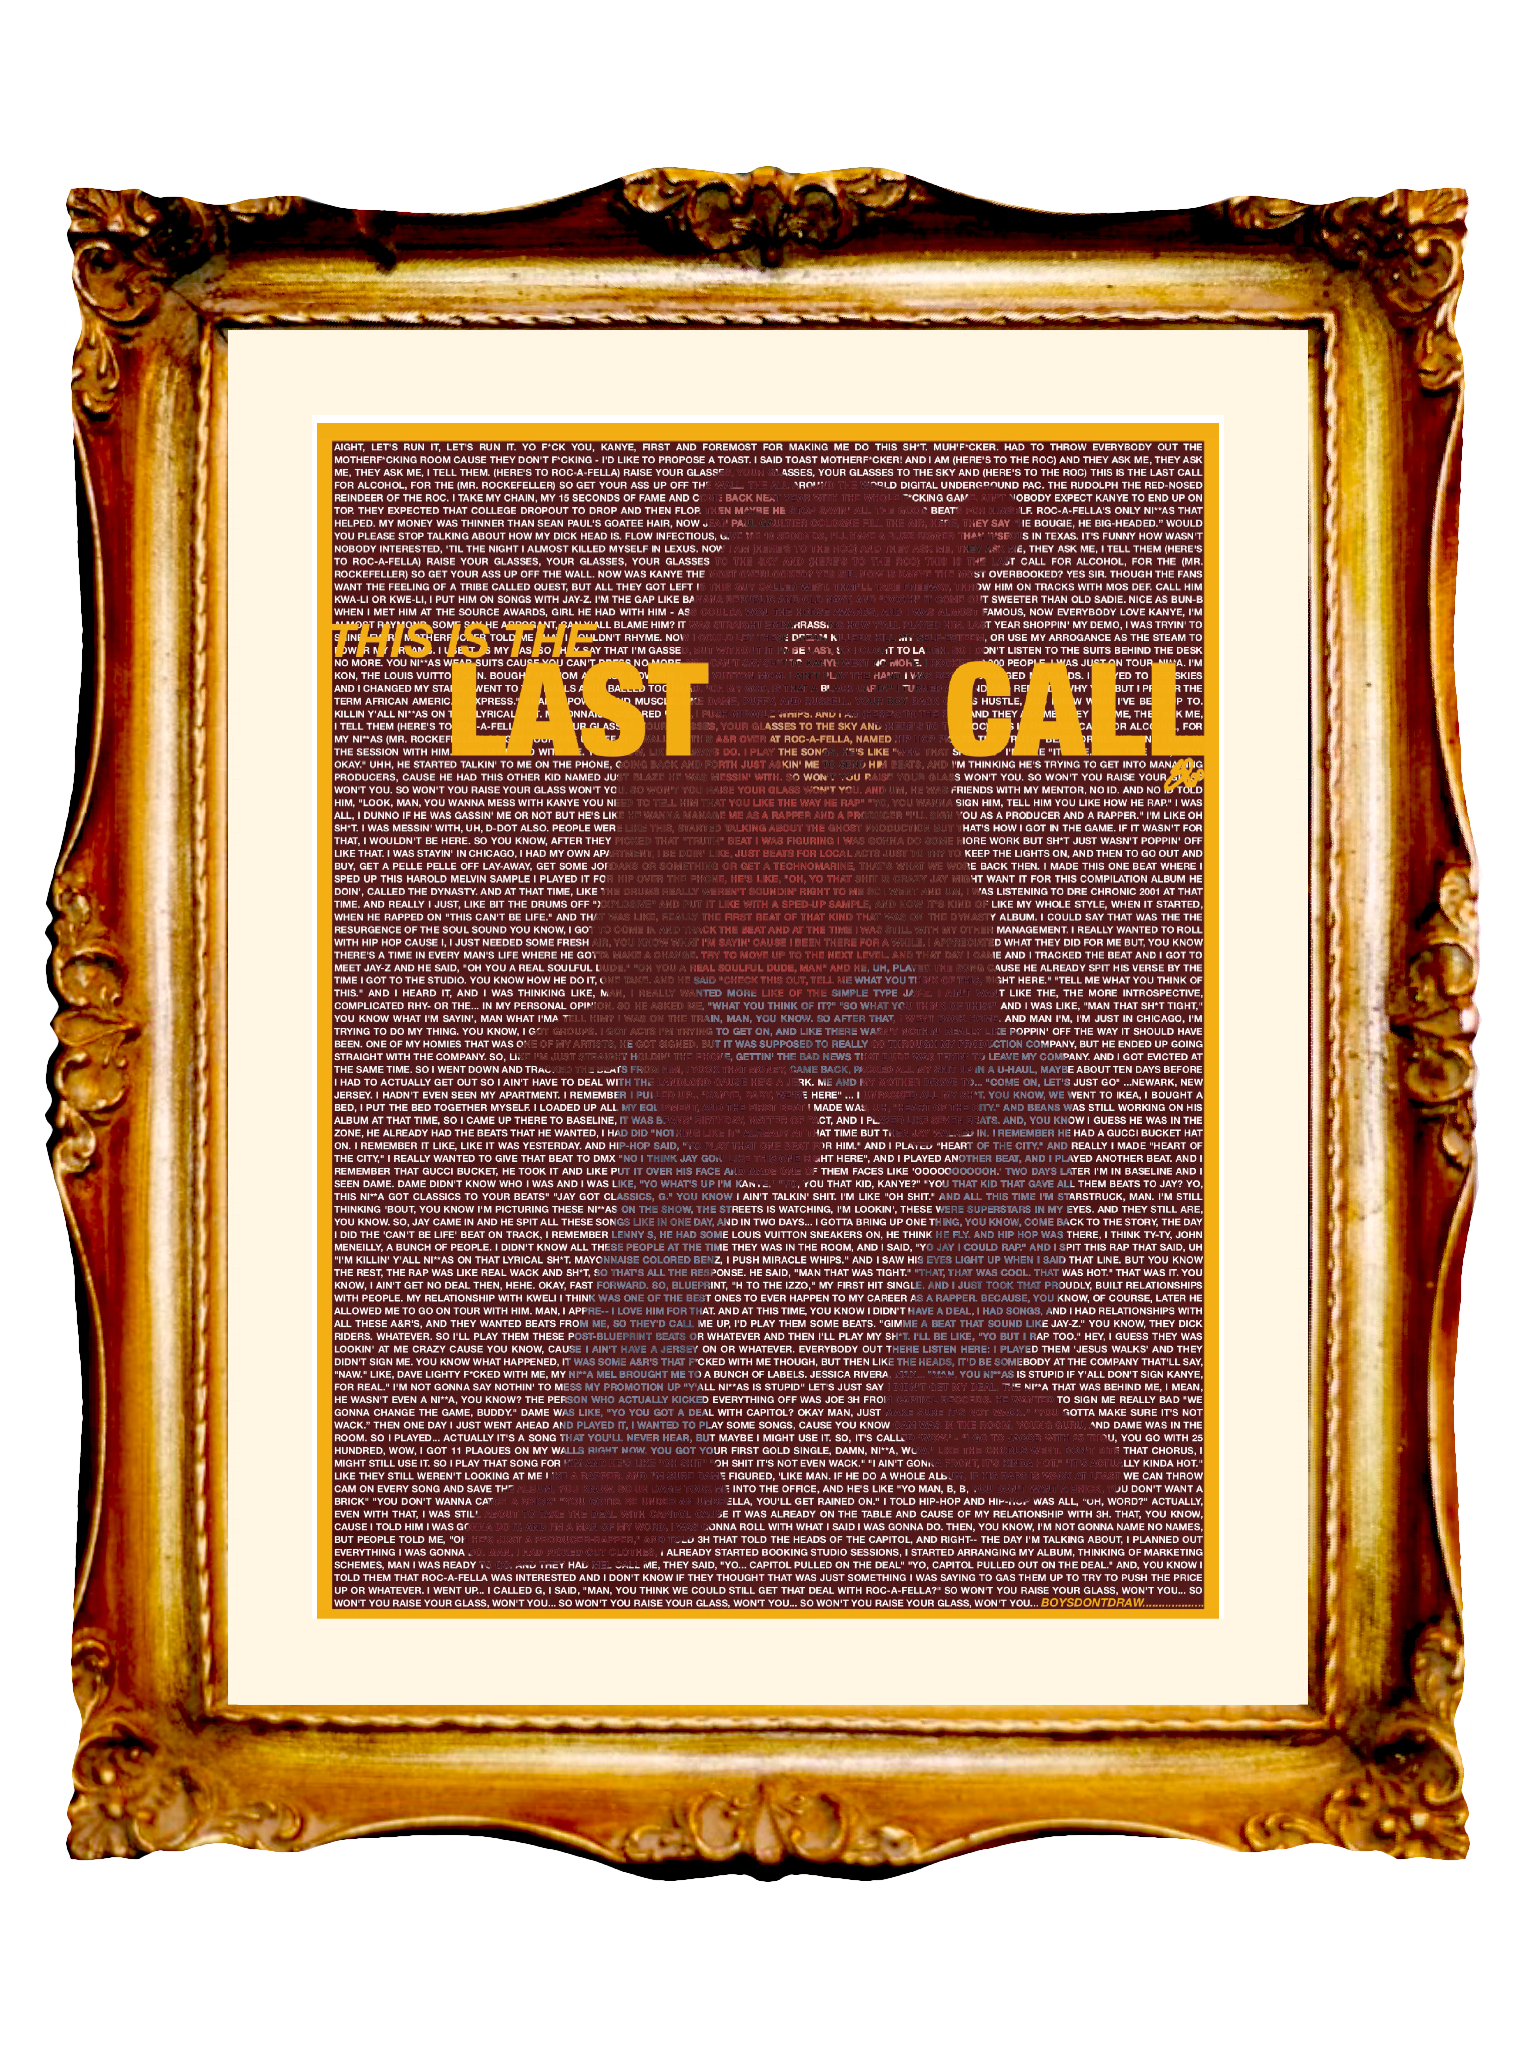 KANYE WEST - LAST CALL - Limited Poster by BOYSDONTDRAW